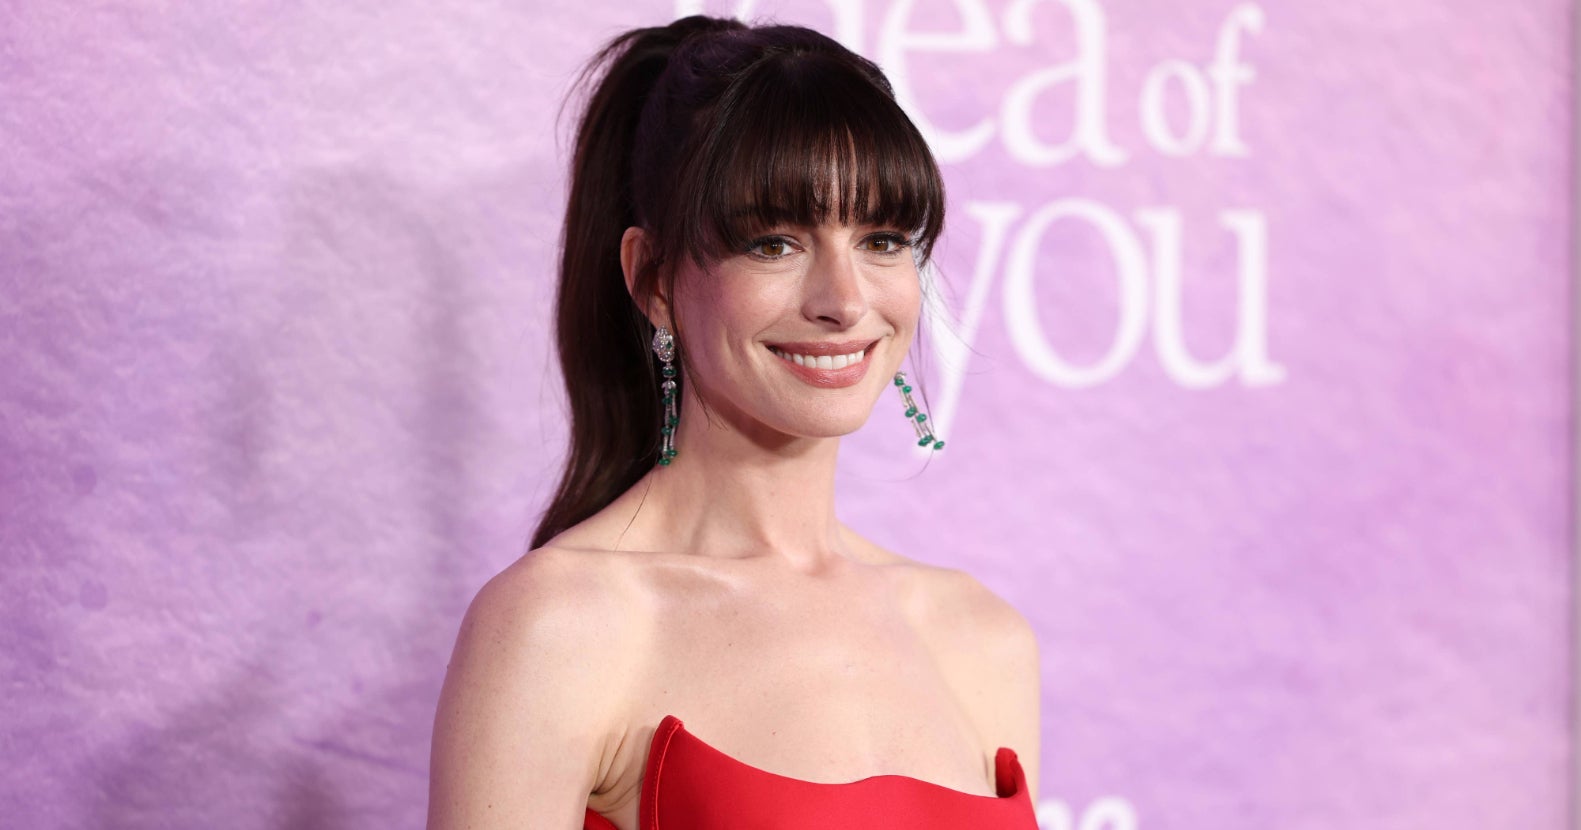 Anne Hathaway's The Idea Of You Premiere Red Carpet Dress Is Modern And Classic